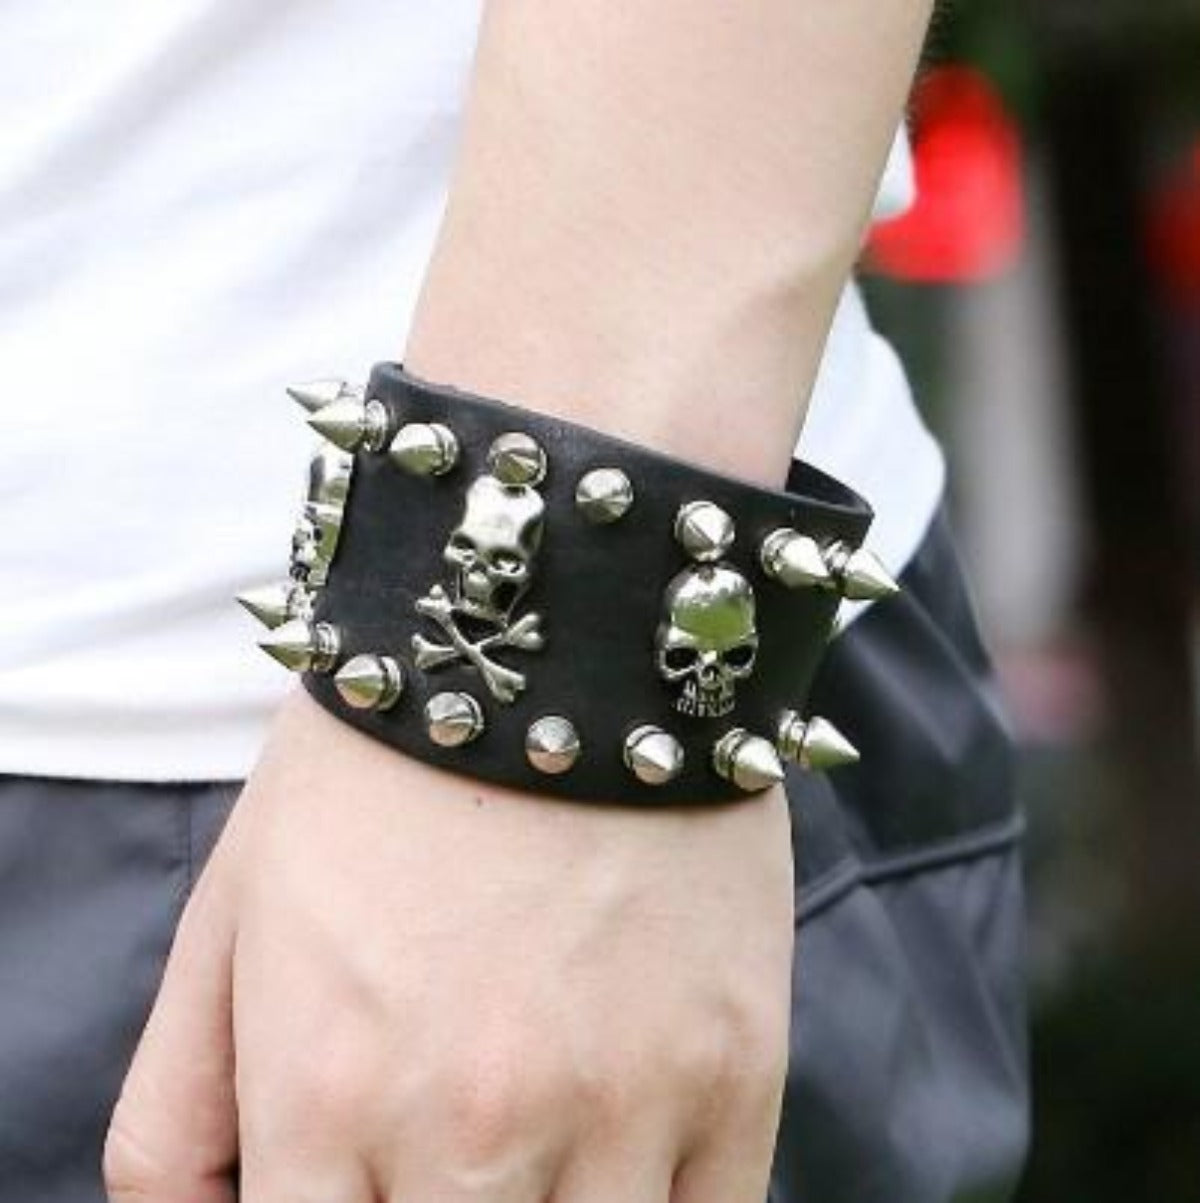 A person wearing Skull & Bones Biker Wristbands with skulls and spikes.